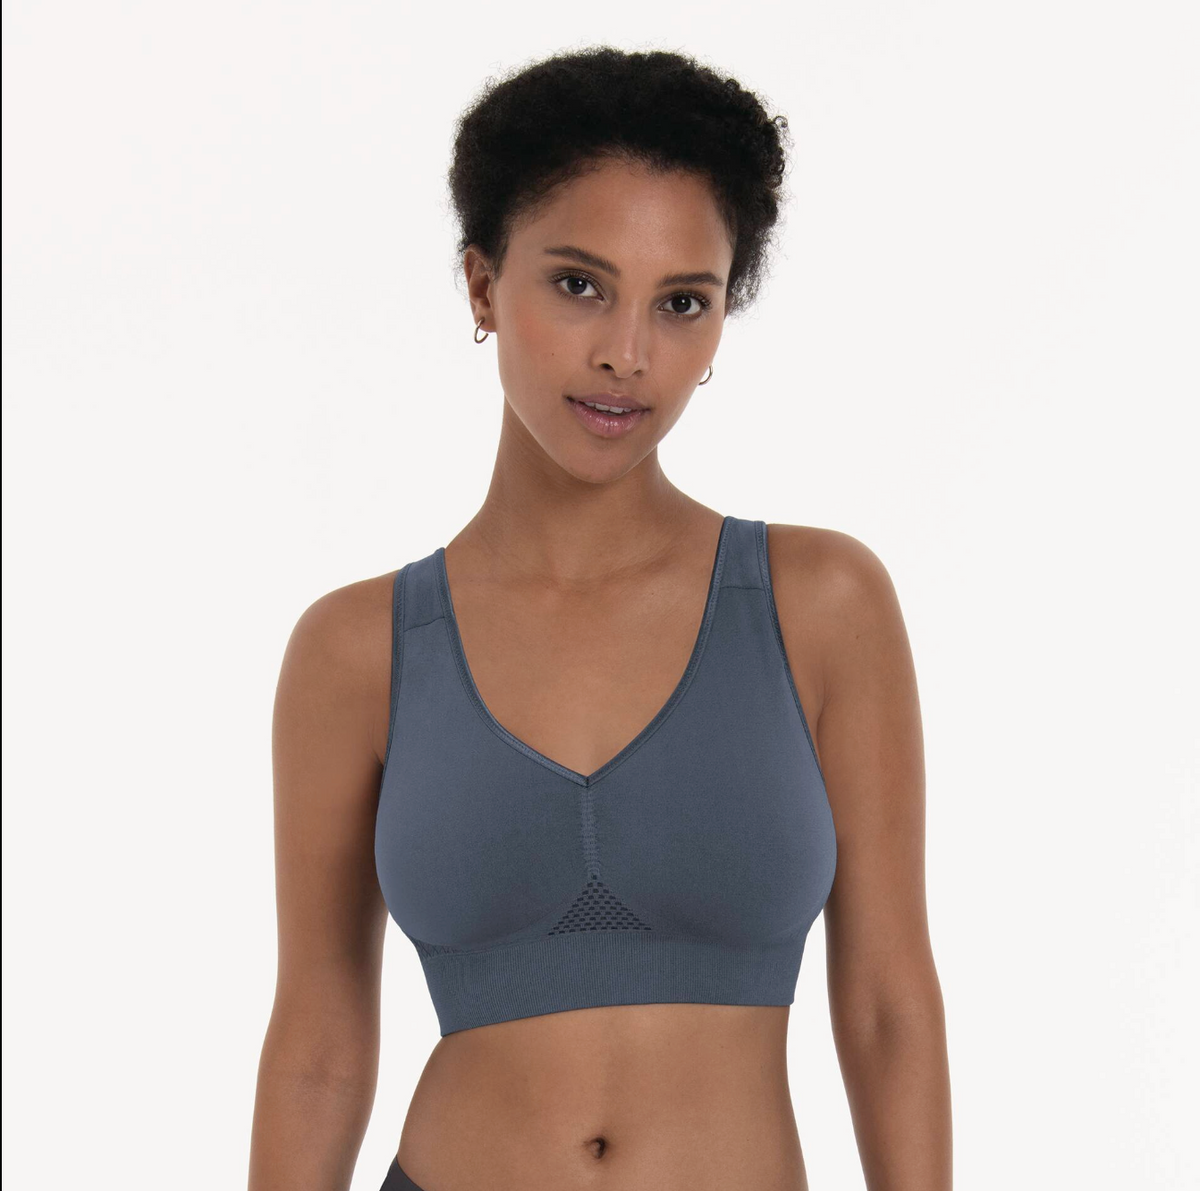 La Comfort Lingerie Store - There's nothing better than a bra that flexes  with you. #StartABramance with our 16 Hours of Comfort bra range. Shop Now:  www.lacomfortlingeriestore.com #VHWomen #VHIntimates #16HourBra  #WorksLikeYou #VanHeusenIntimates #